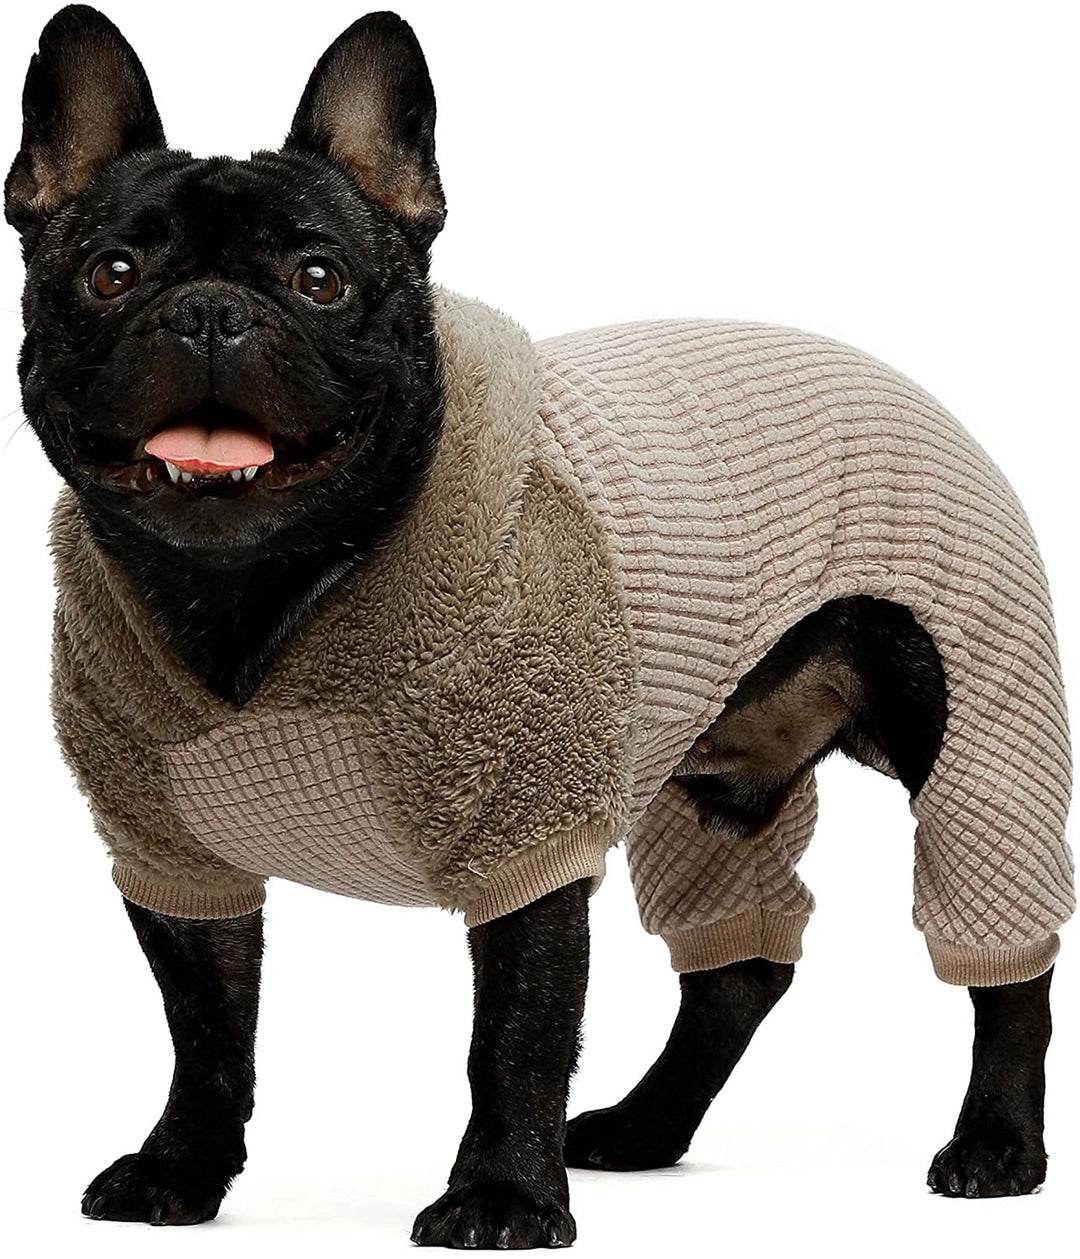 Fuzzy Velvet Hooded Jumpsuit Brownfrench bulldog clothes